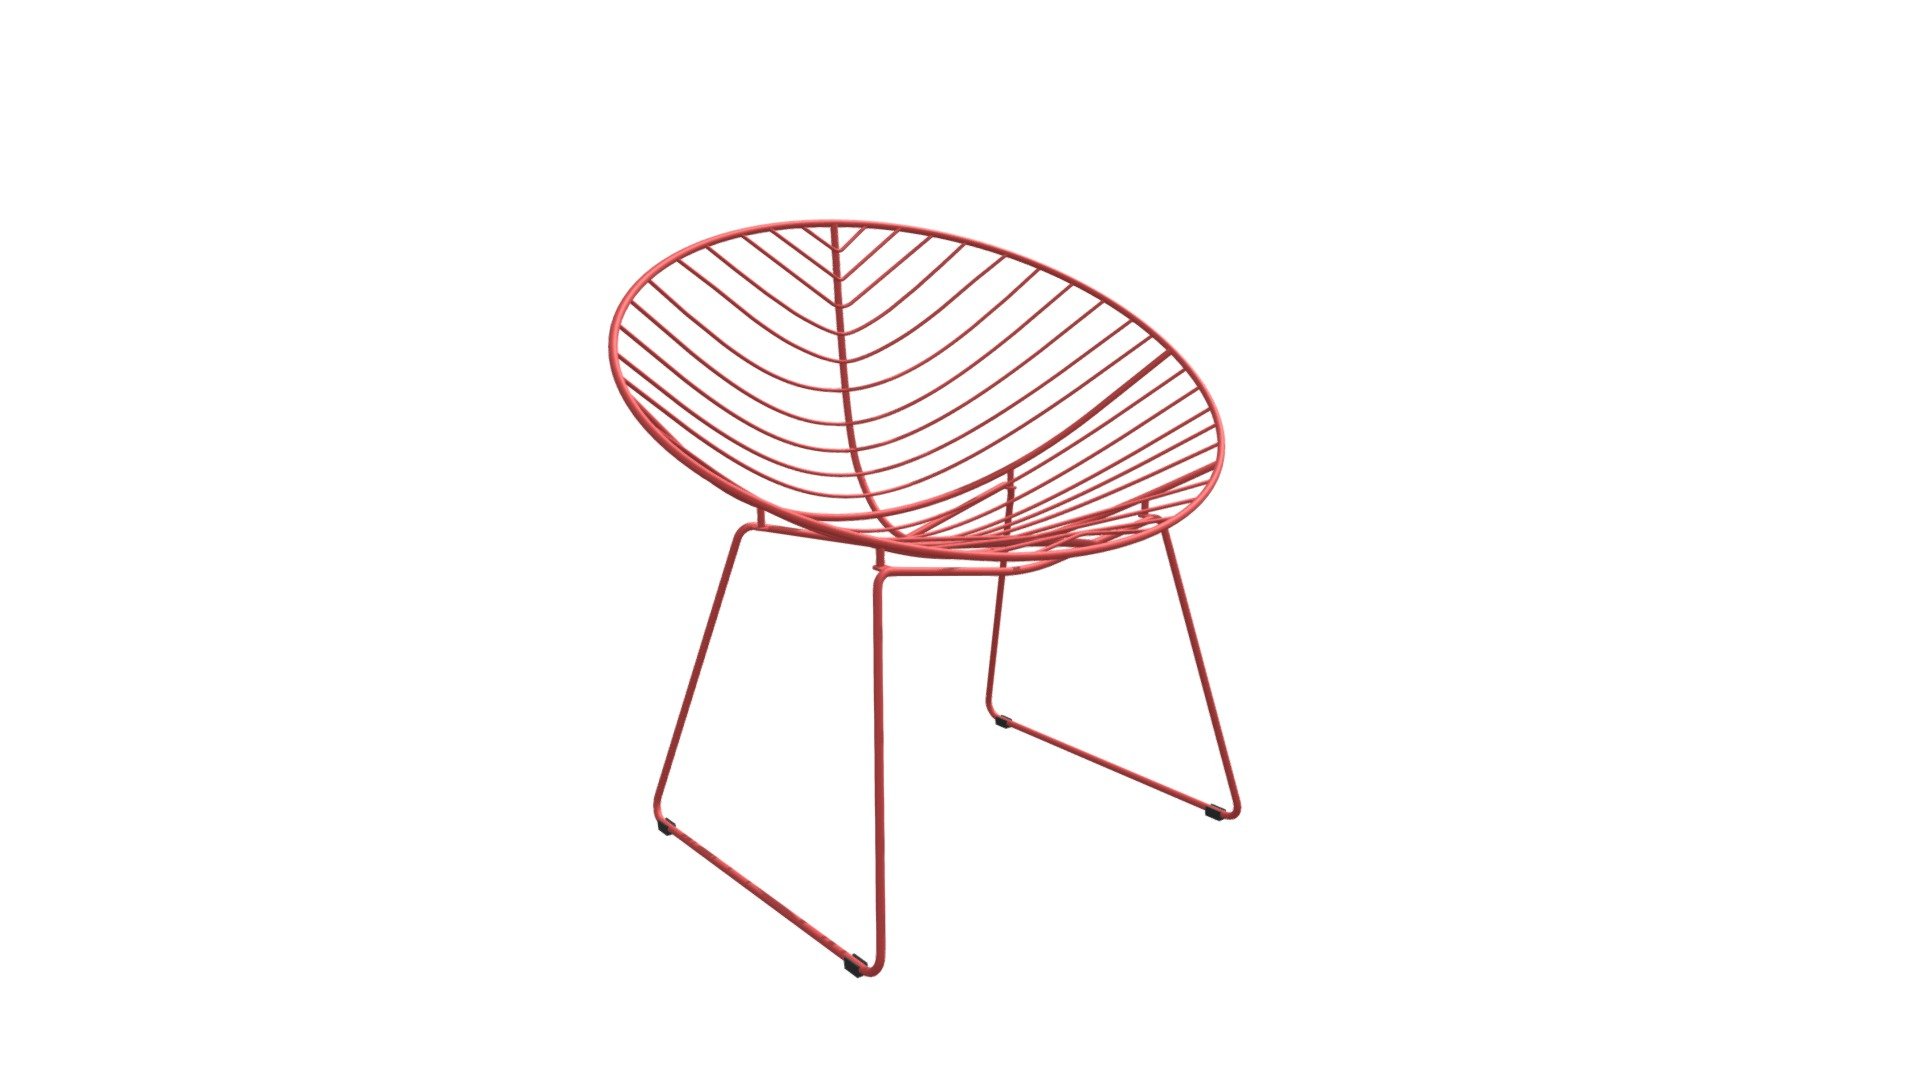 https://zuomod.com/hyde-outdoor-lounge-chair-red

Inspired by nature, this wired leaf pattern creates a simply stunning outdoor chair for lounging the day away. Perfect poolside or on your deck. We love them in multiples scattered about like pieces of sculpture. Comfortable scoop design rests securely on its base and is built to withstand the elements. Also beautiful placed in your interior space for a modern touch 3d model